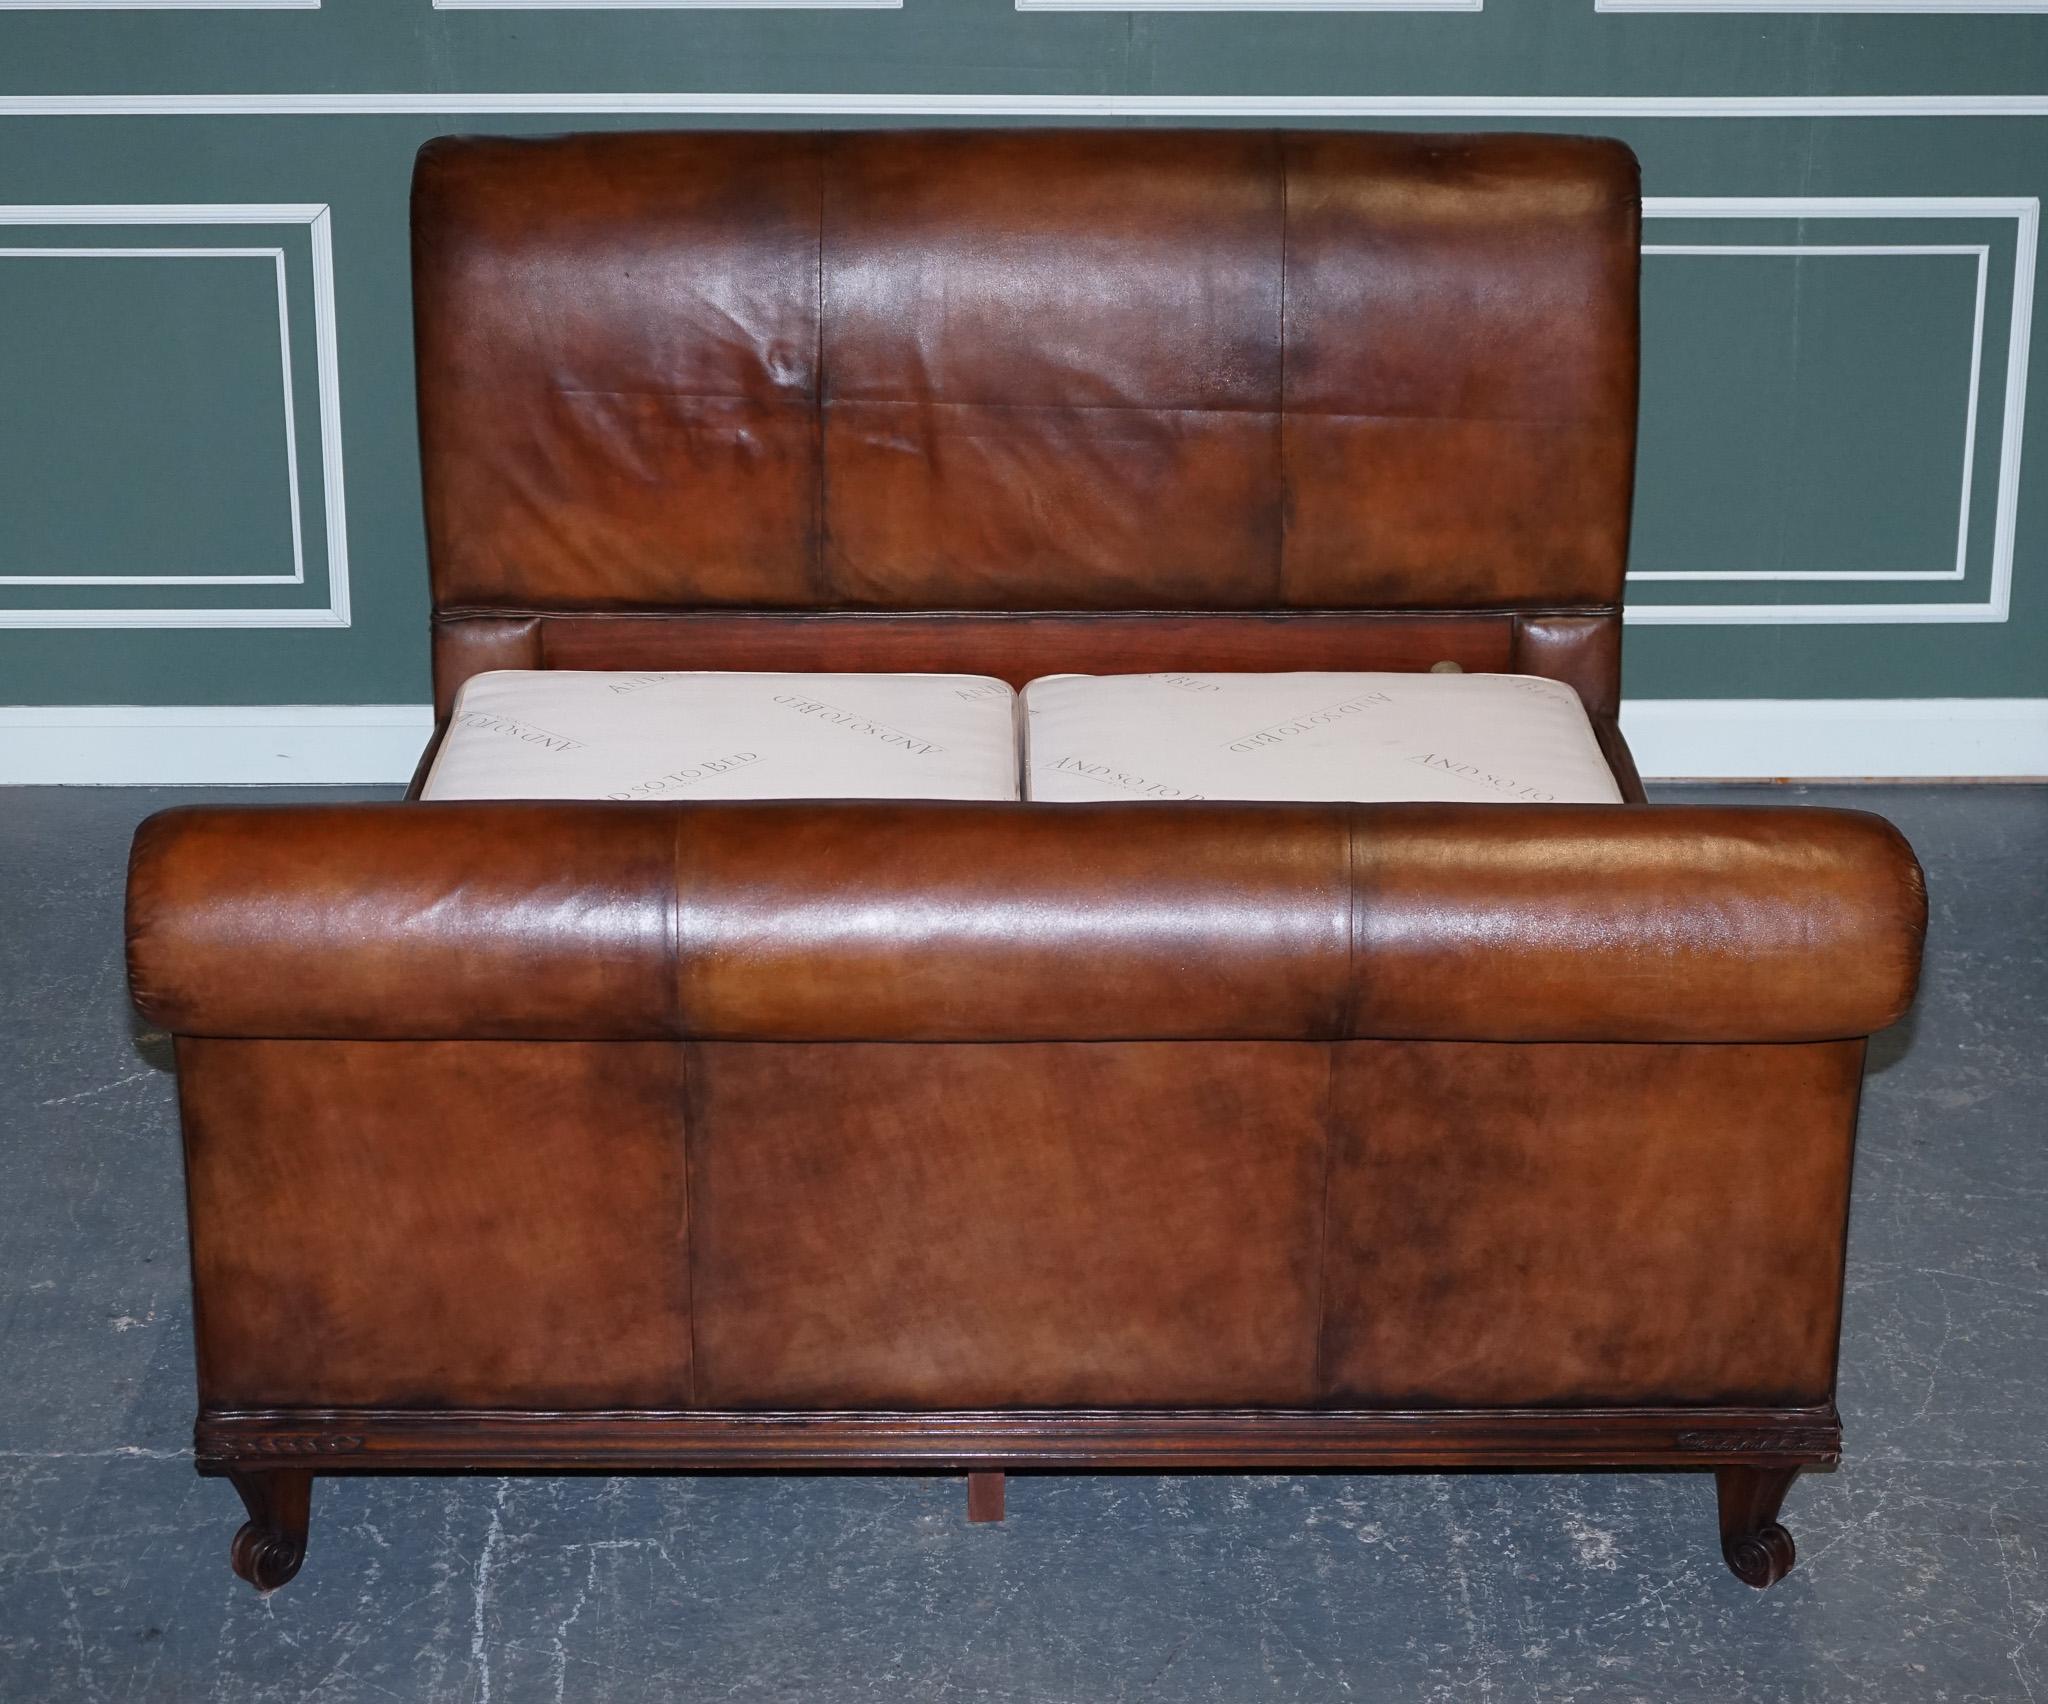 We are delighted to offer for sale this and so to bed hand dyed leather bed with Vi-Sprung divan bases.

There are only a few of these beds hand dyed in the world, and it has been fully restored by our leather polishers, who manage all our luxury